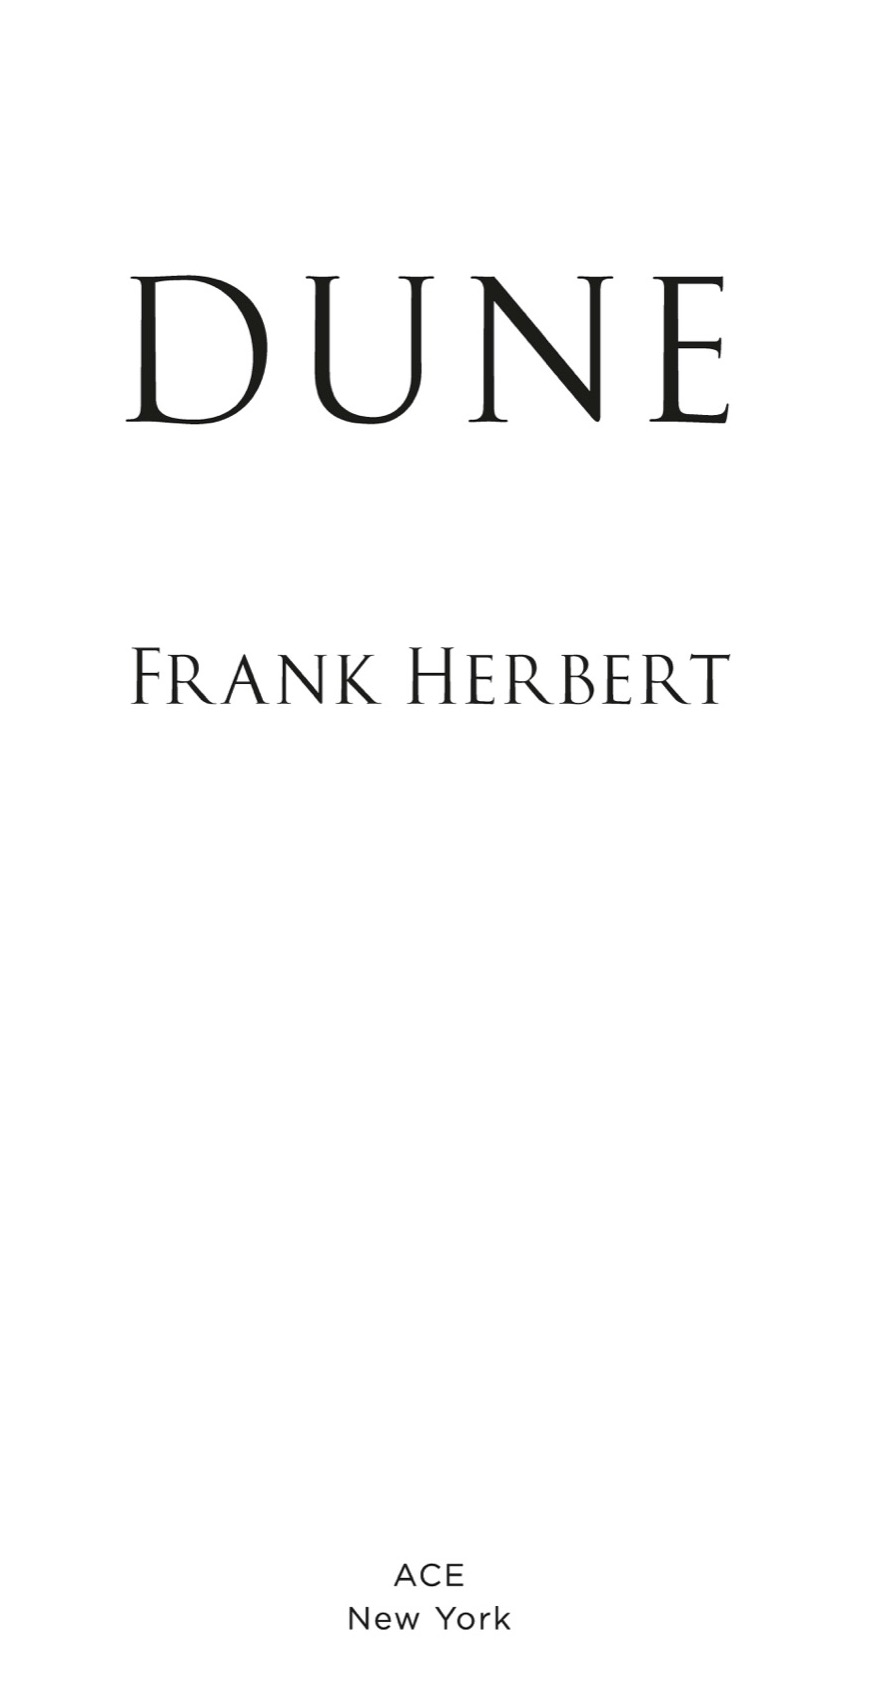 Title Page image for Dune